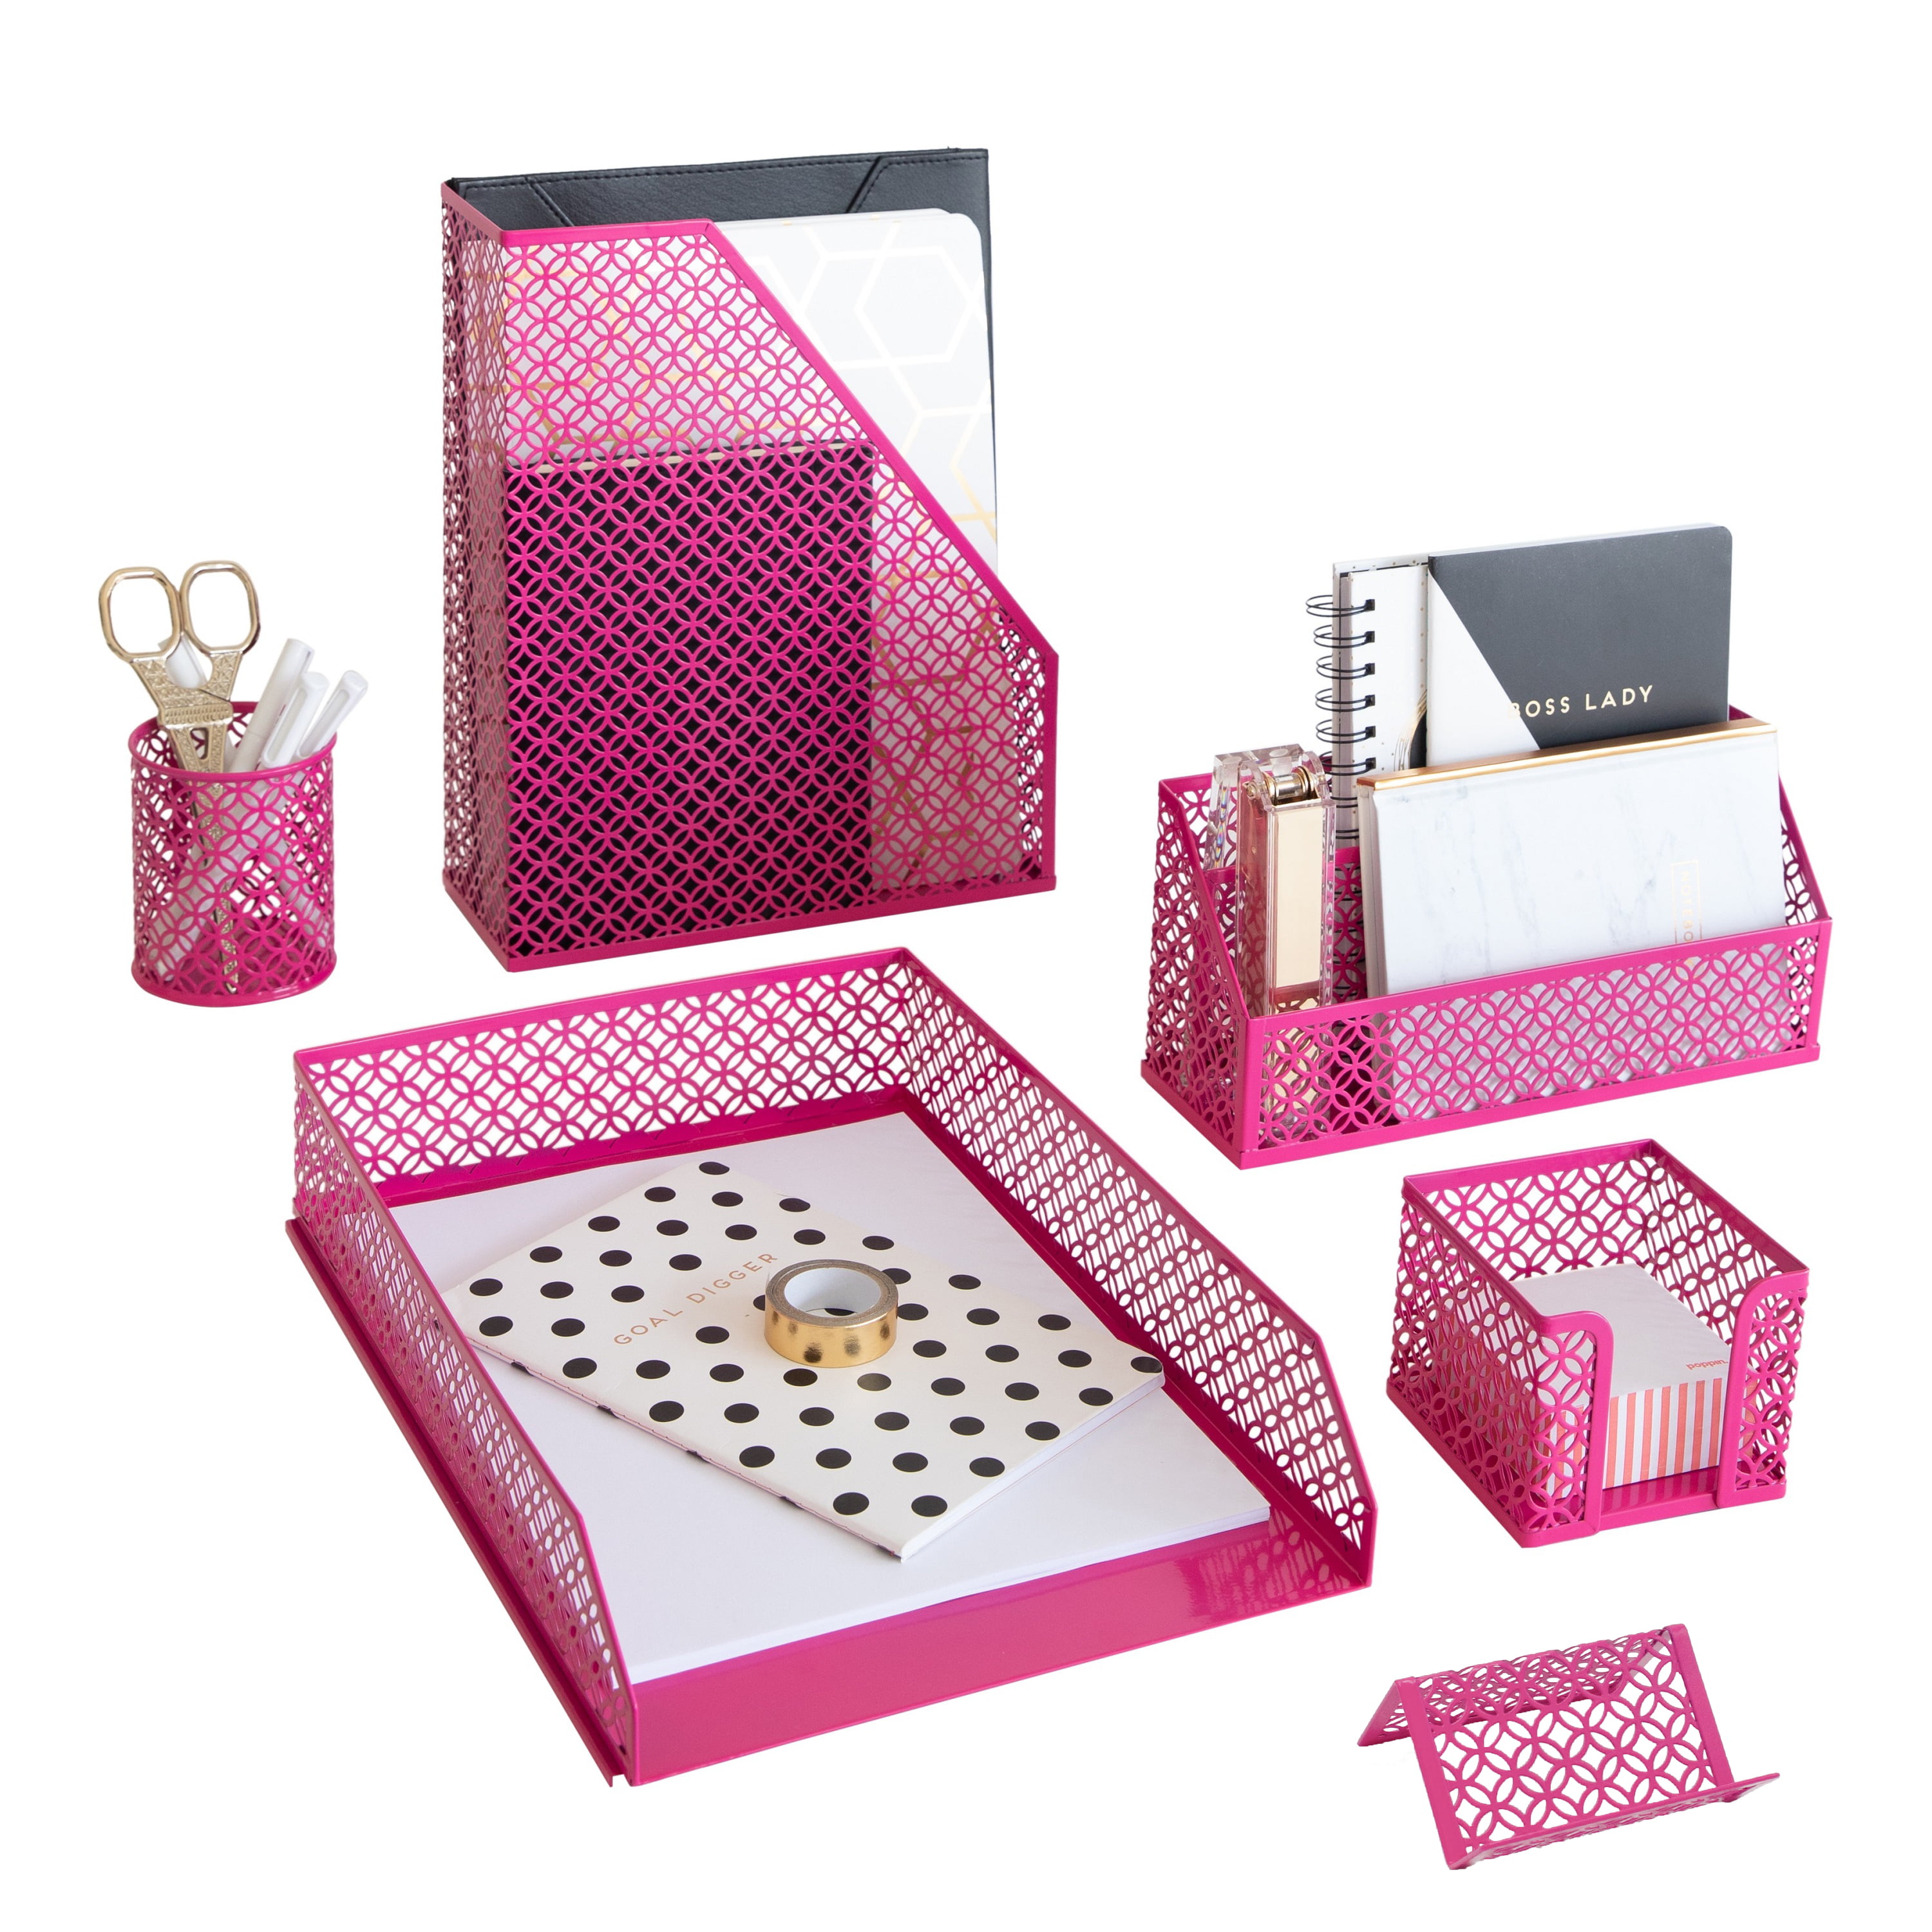 hudstill 5 Piece Office Supplies Pink Desk Organizer Set in Cute Floral  Design - Perfect Pink Desk Accessories and Room Decor for Cubicle, Office